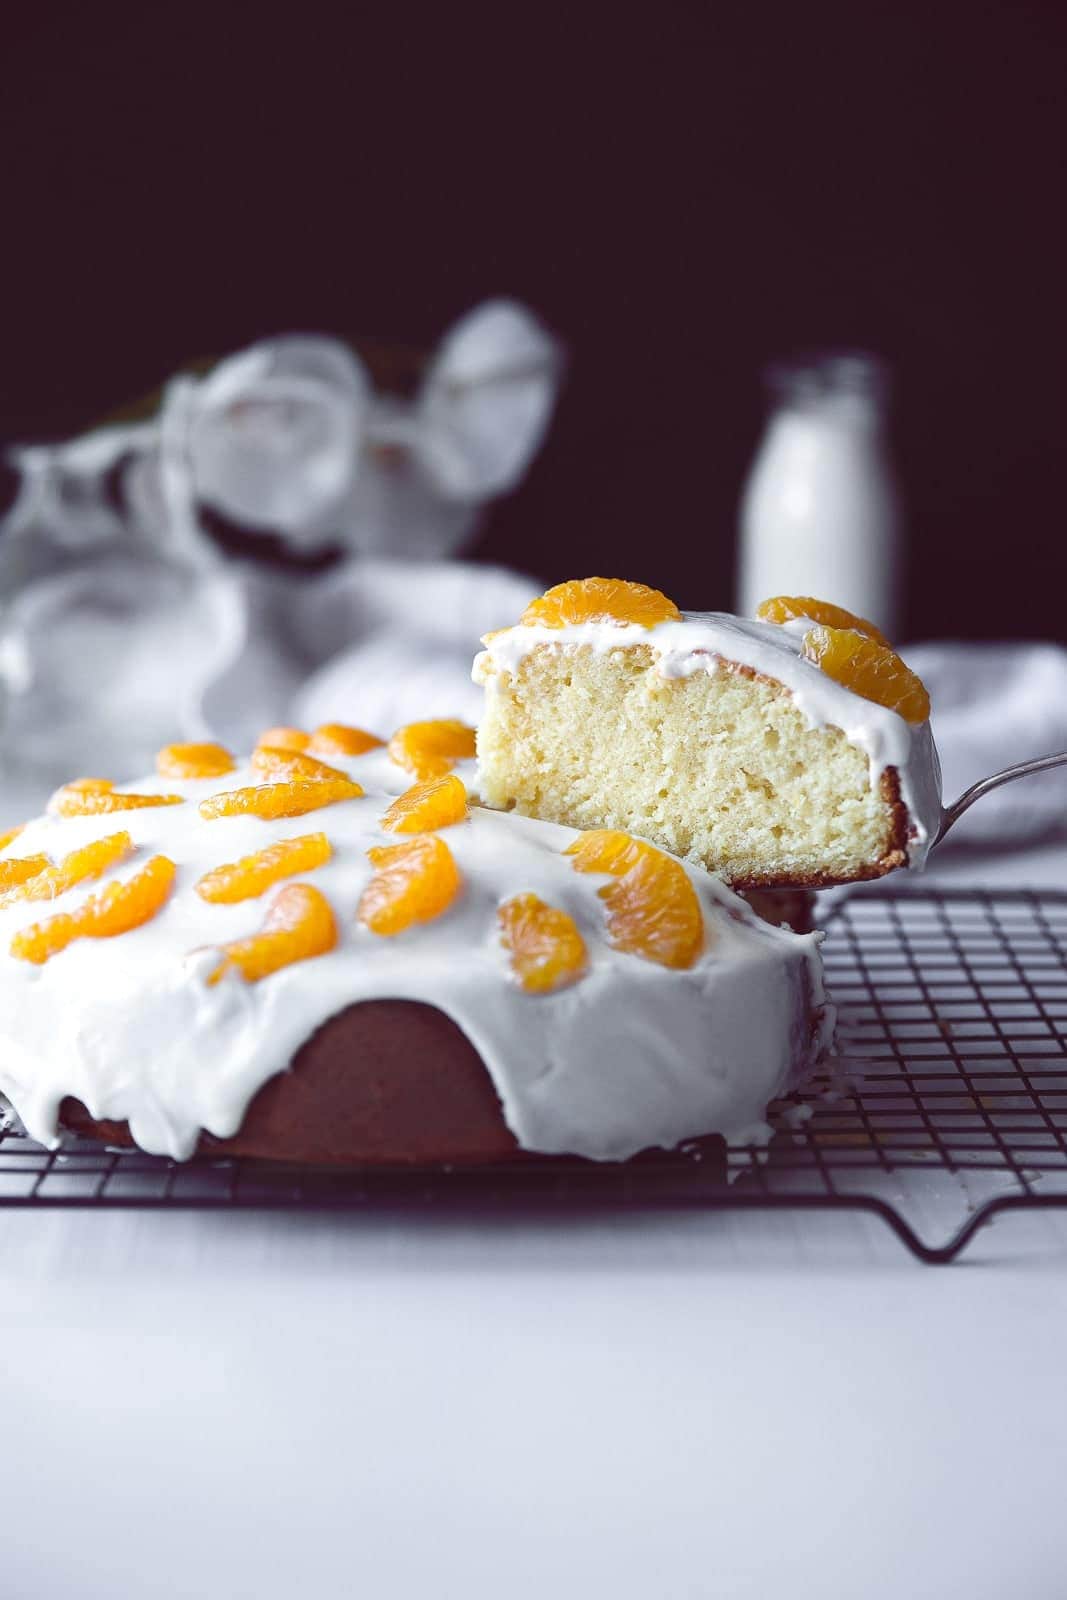 An easy weekday cake: one bowl lemon cake with a coconut cream icing and mandarin orange slices.